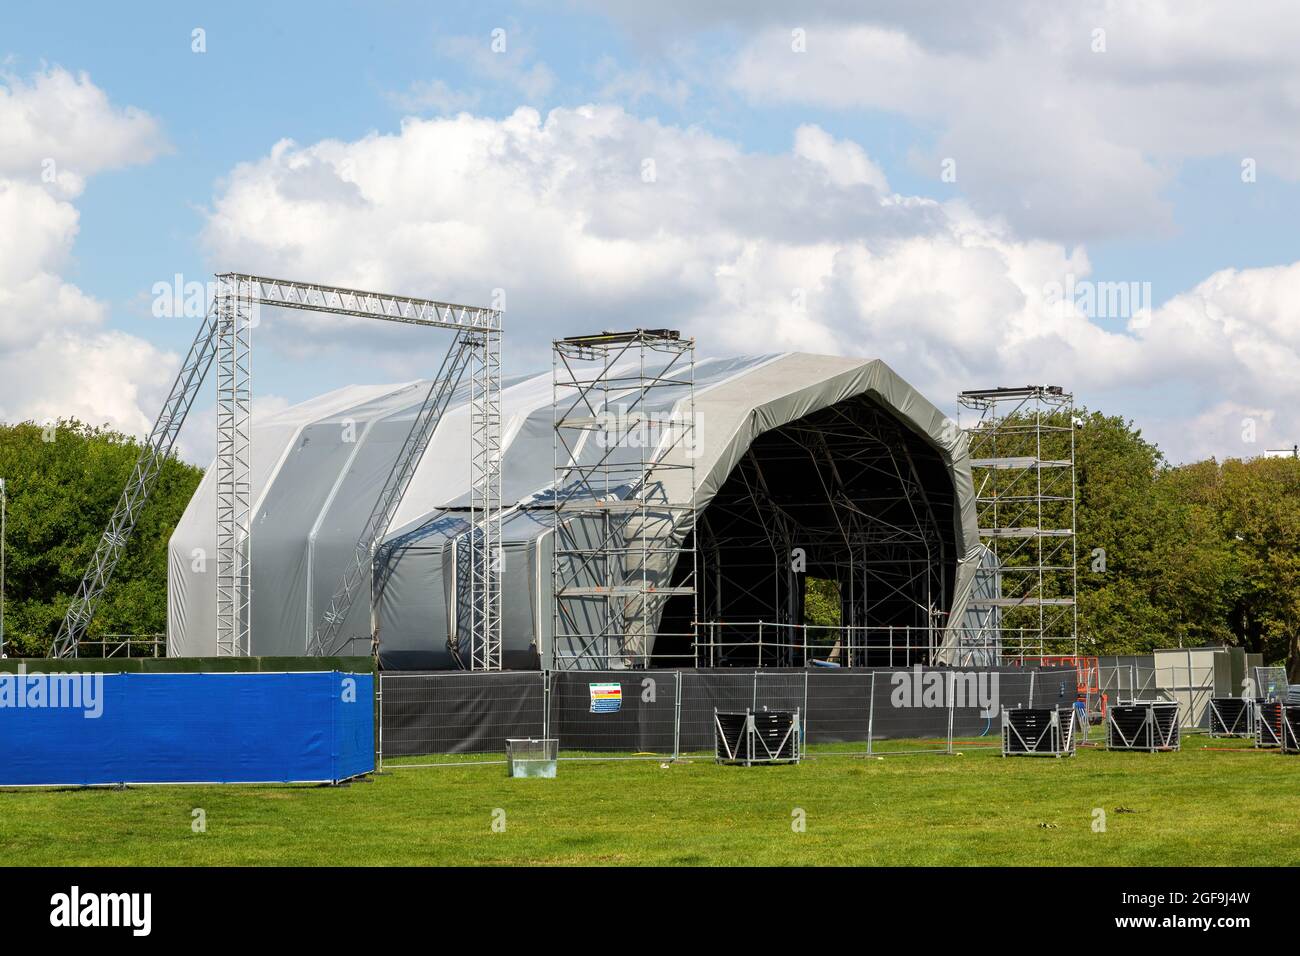 24-08-2021 Portsmouth, Hampshire, UK An Outdoor music festival stage being built for the Victorious festival in South UK Stock Photo